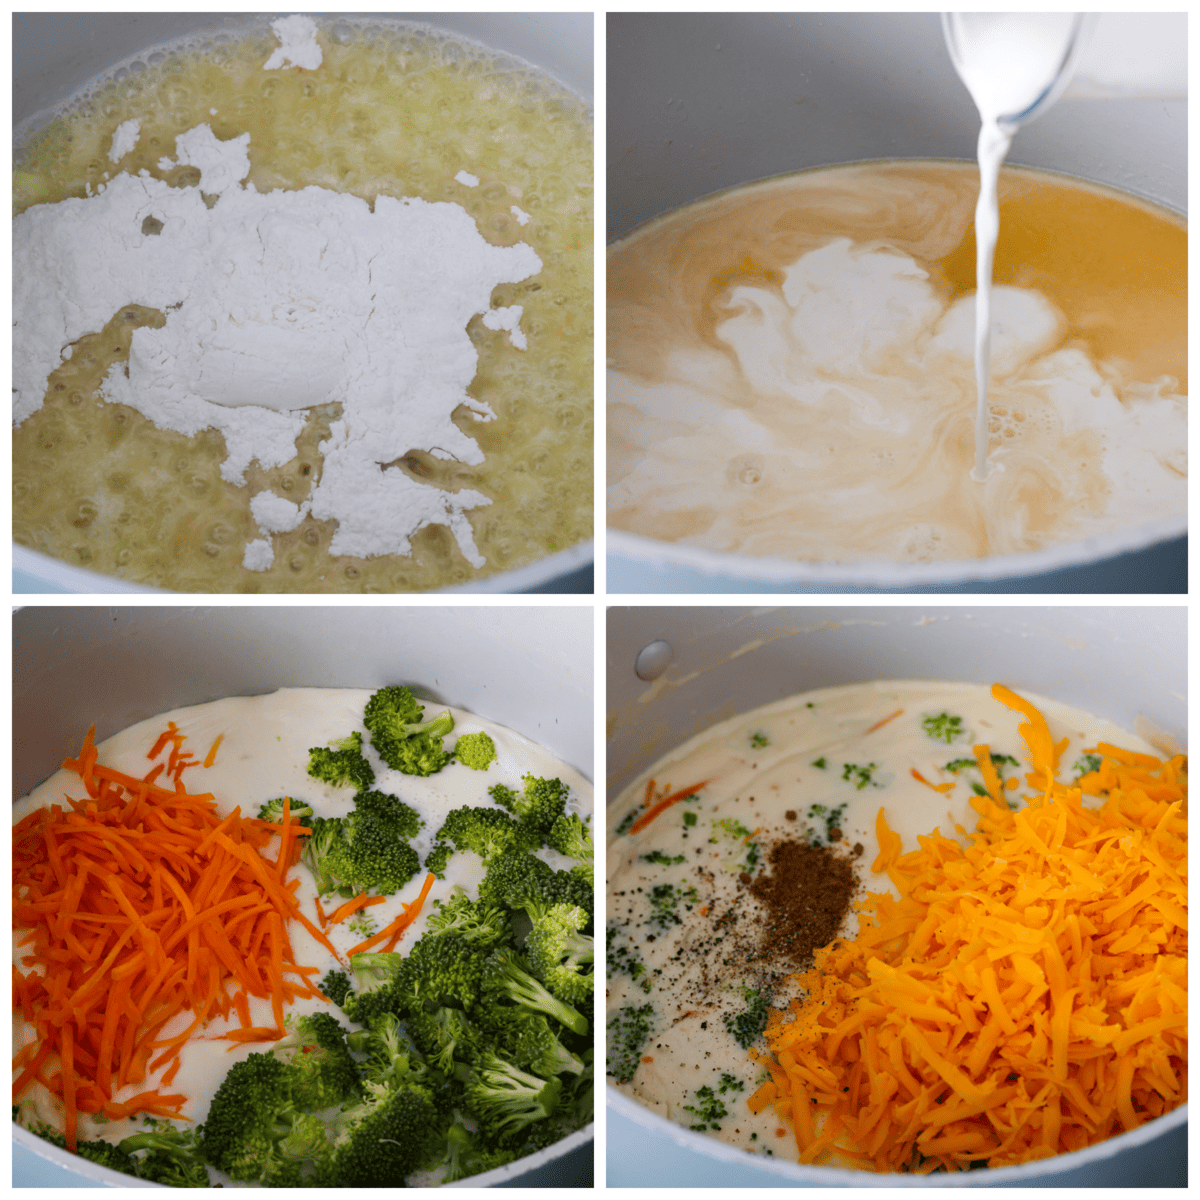 4 pictures showing the process of making the soup. 